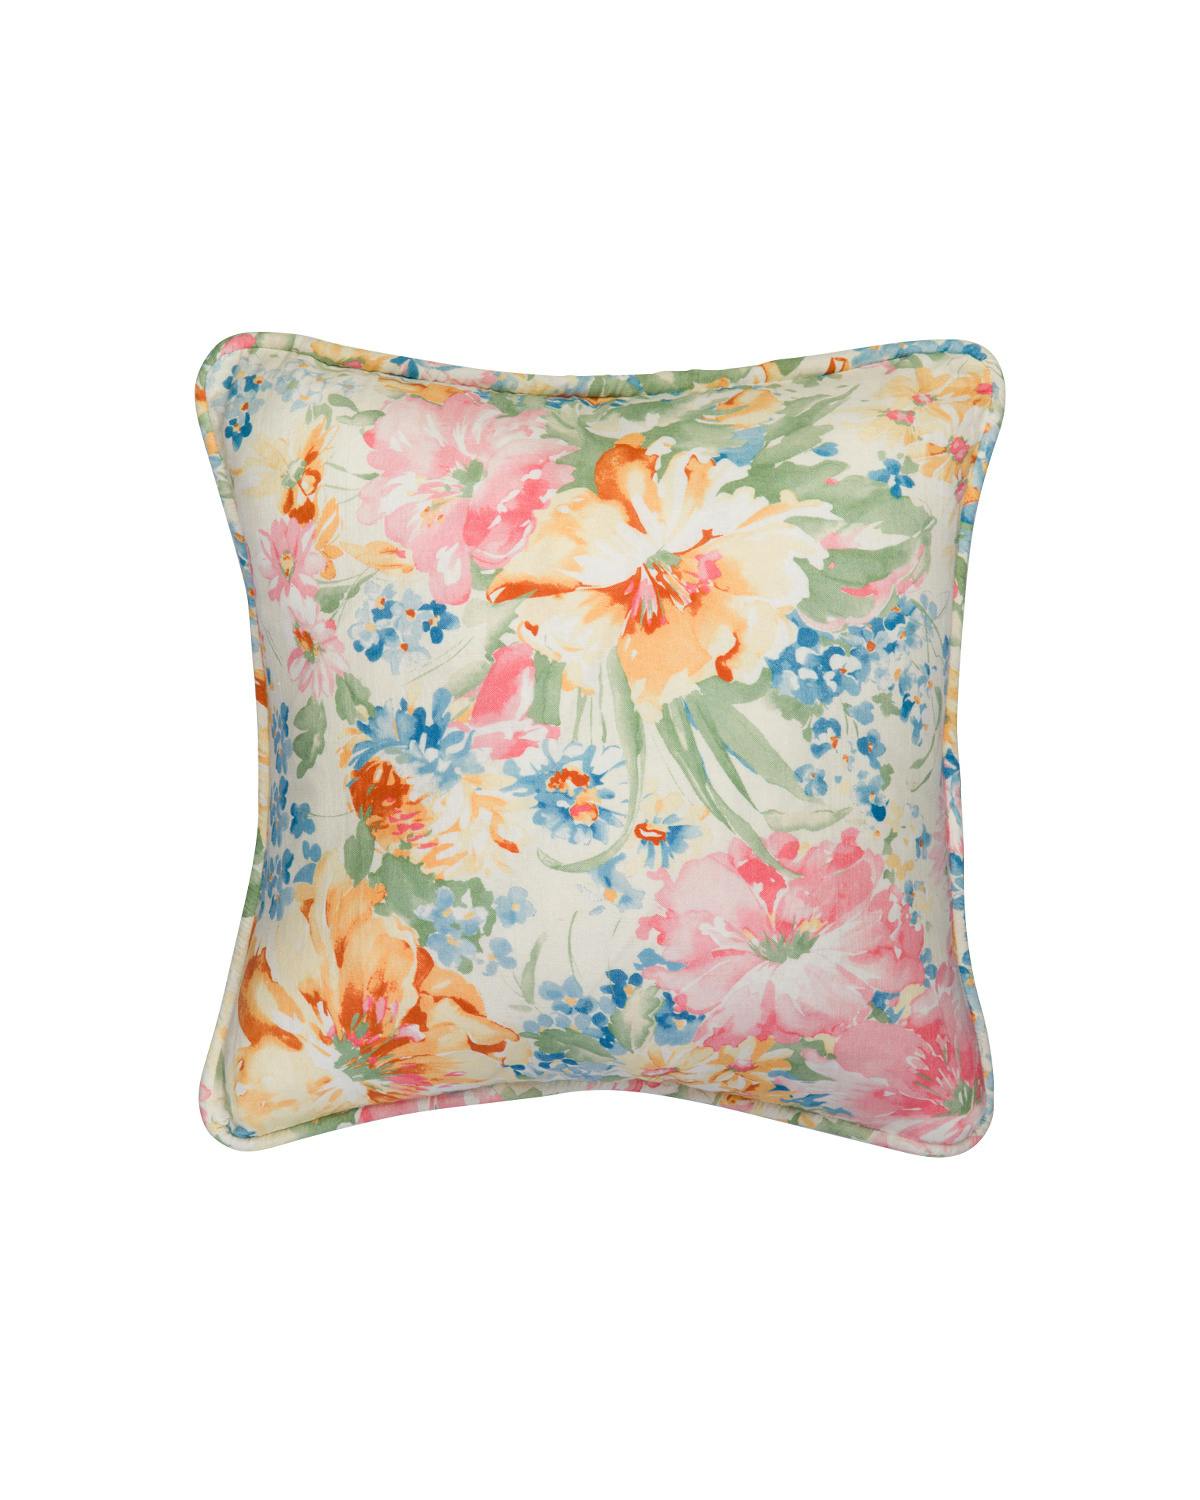 Cushion Cover Linen 60x60 cm, Pink floral. Image #2